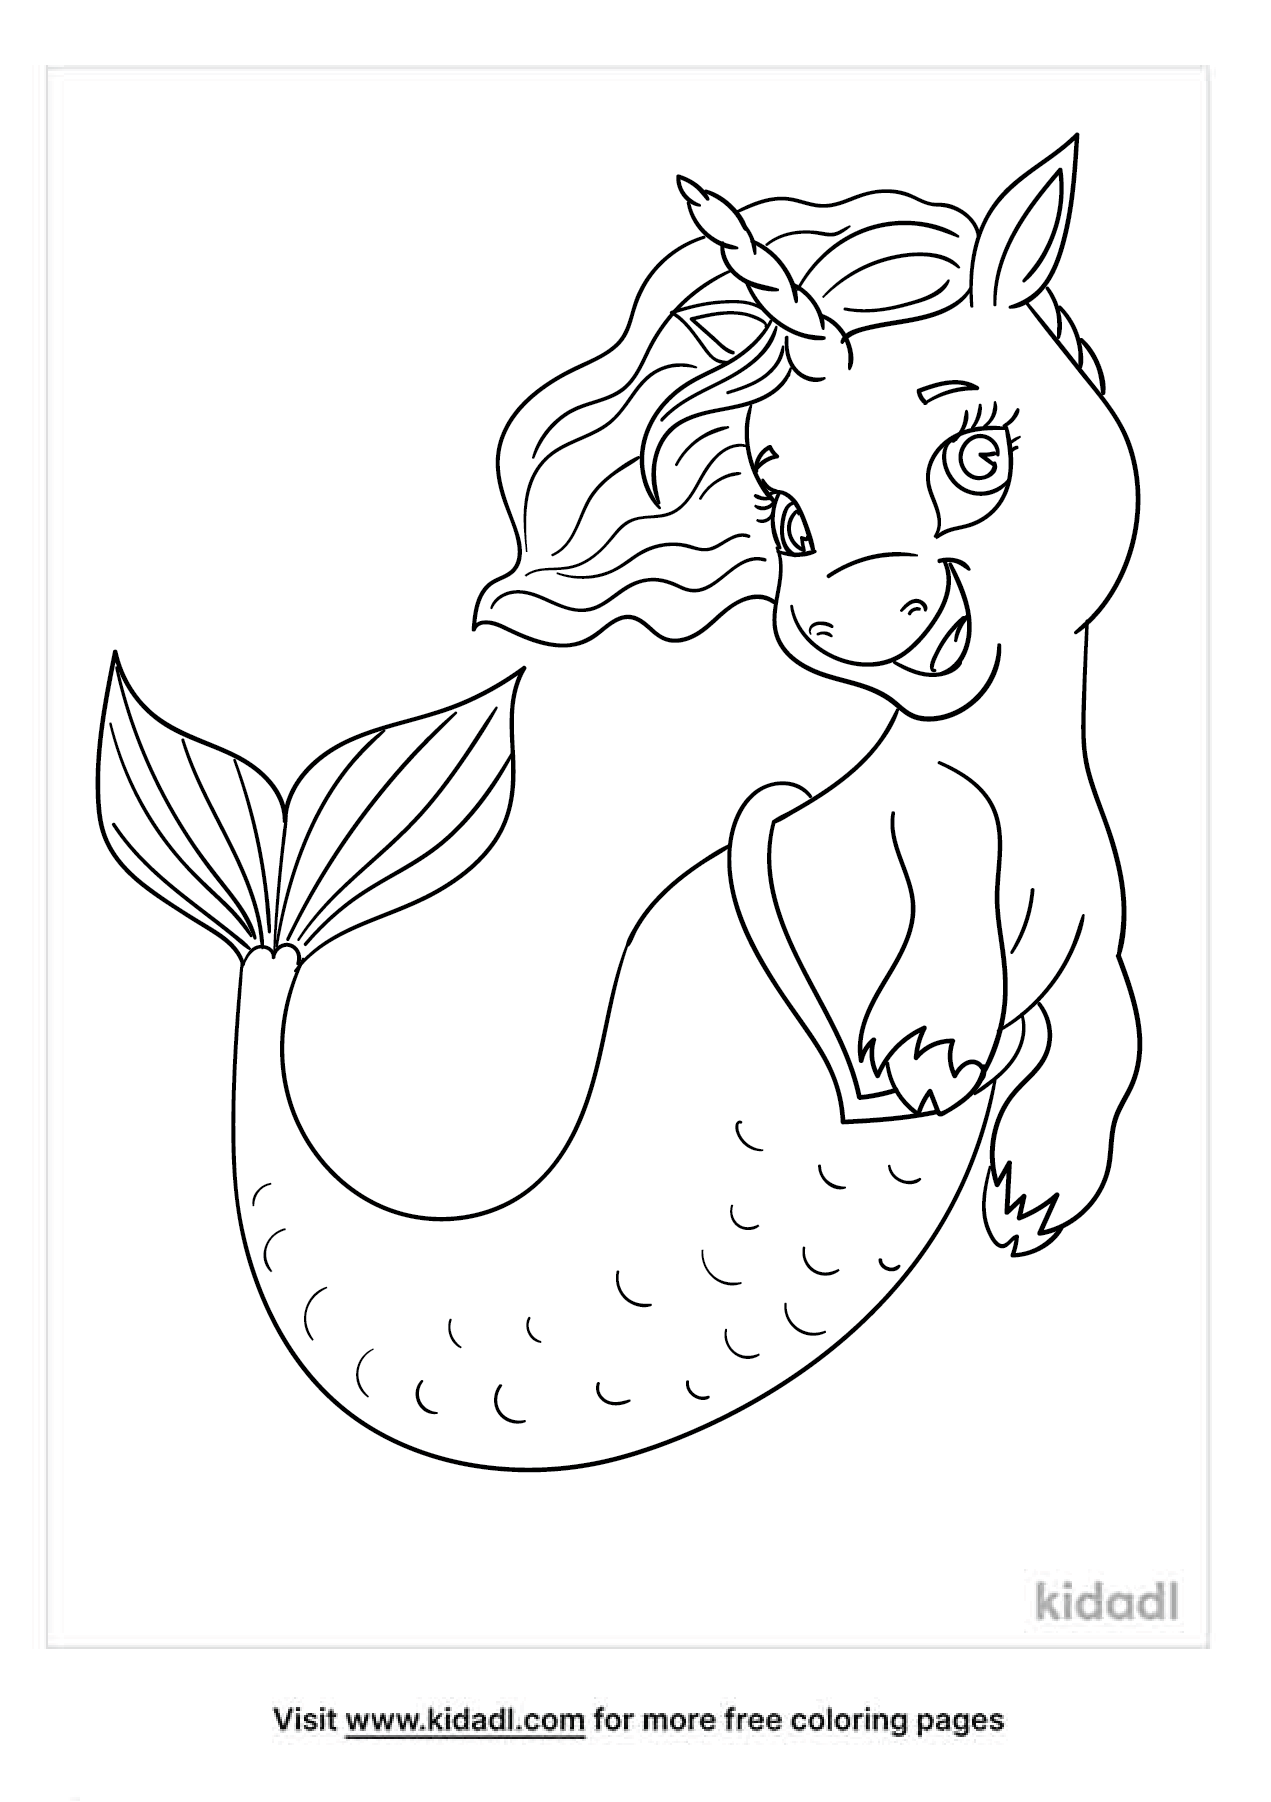 Unicorn Mermaid Coloring Pages Free Unicorns Coloring